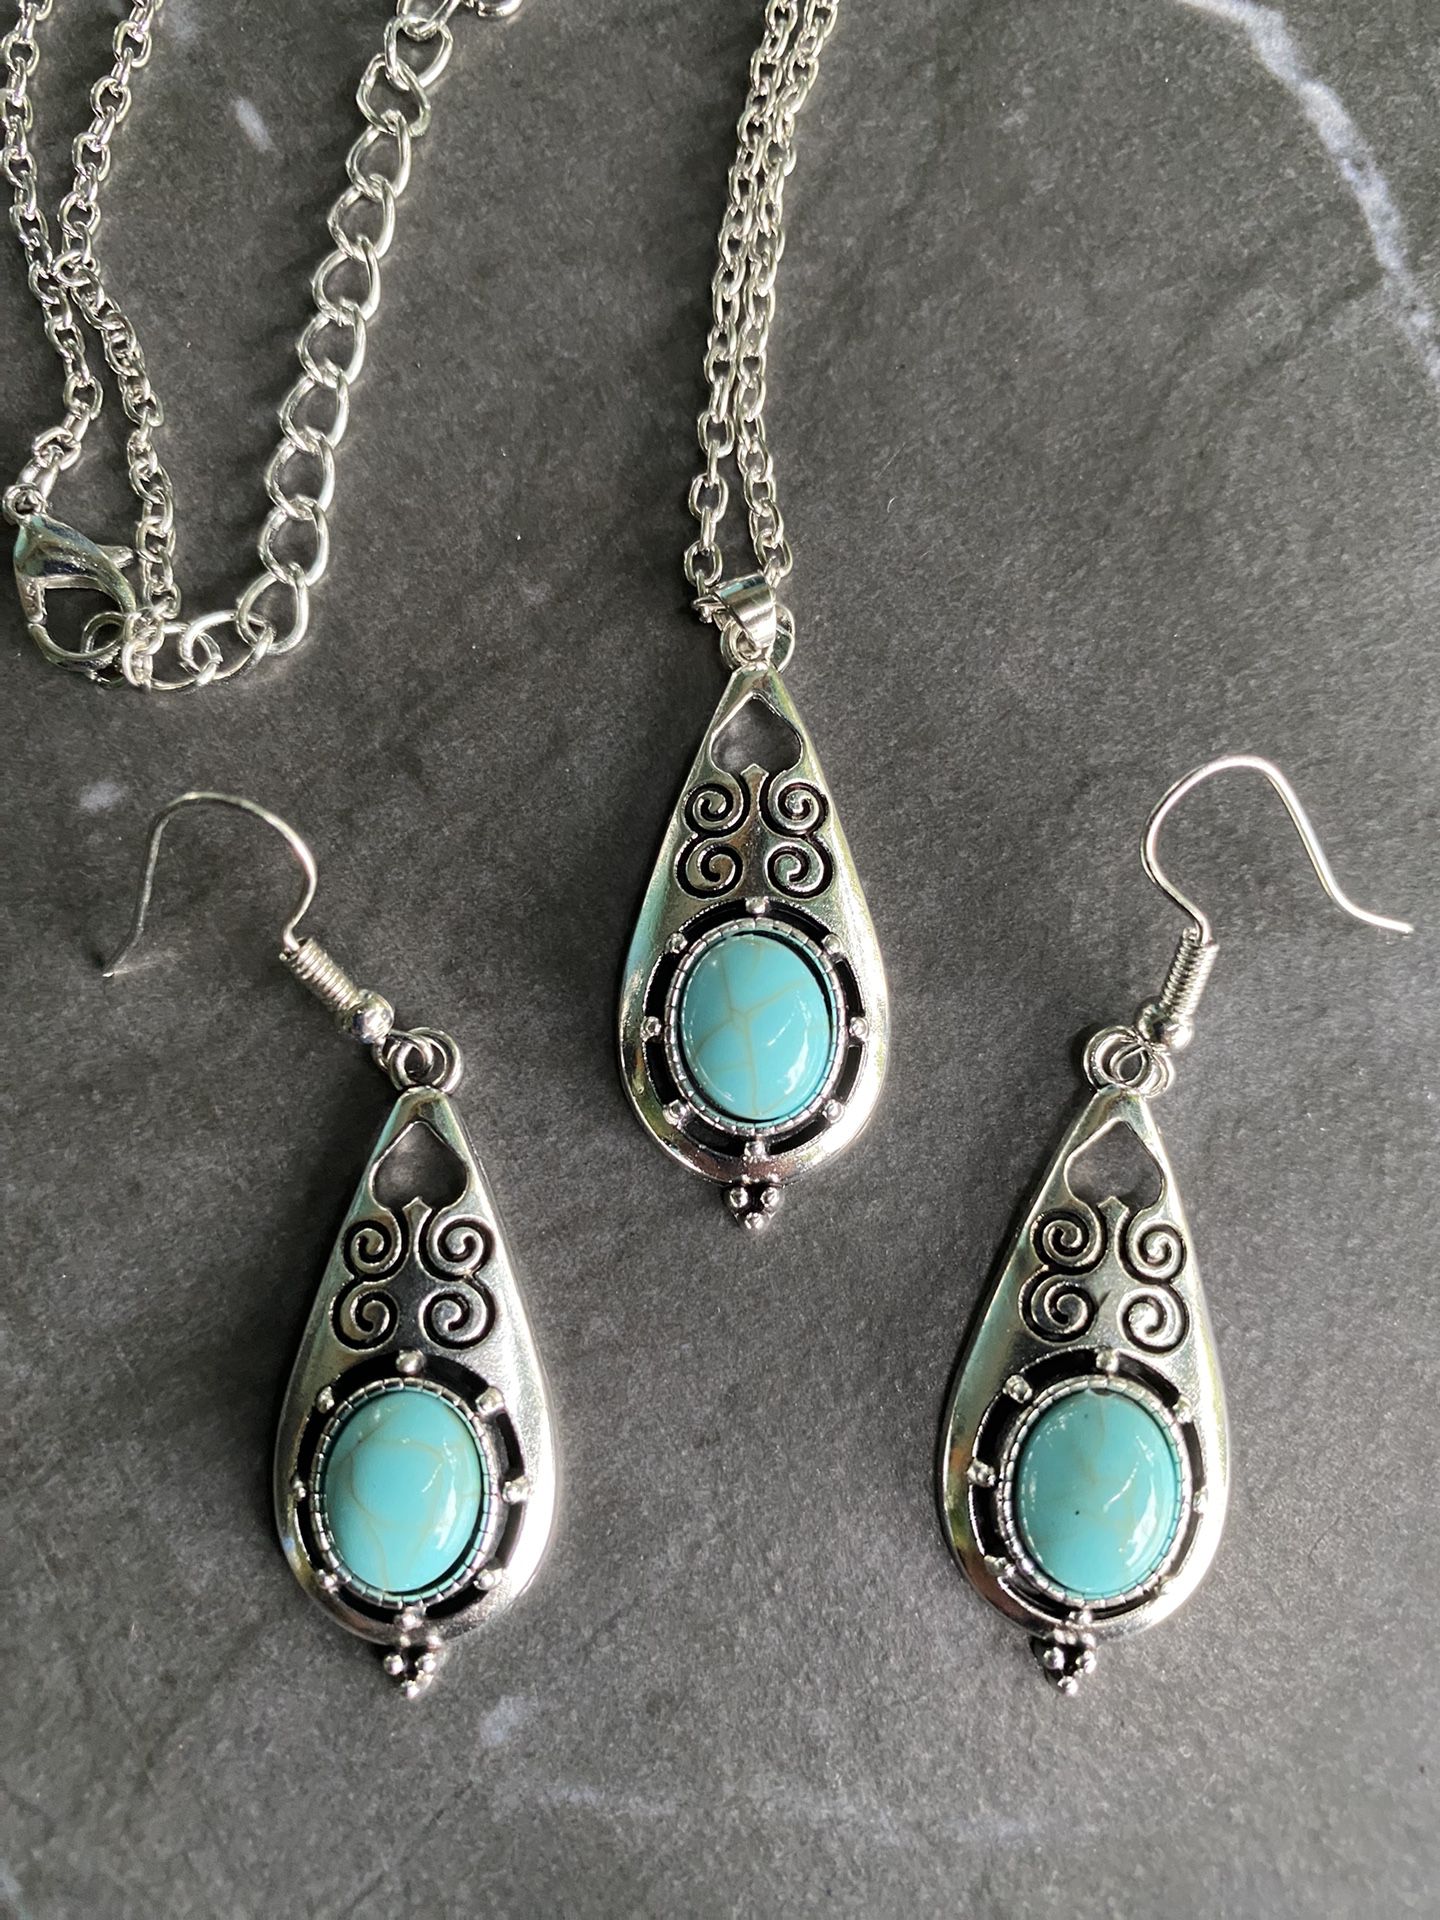 Turquoise Necklace And Earrings Vintage Bohemian Set